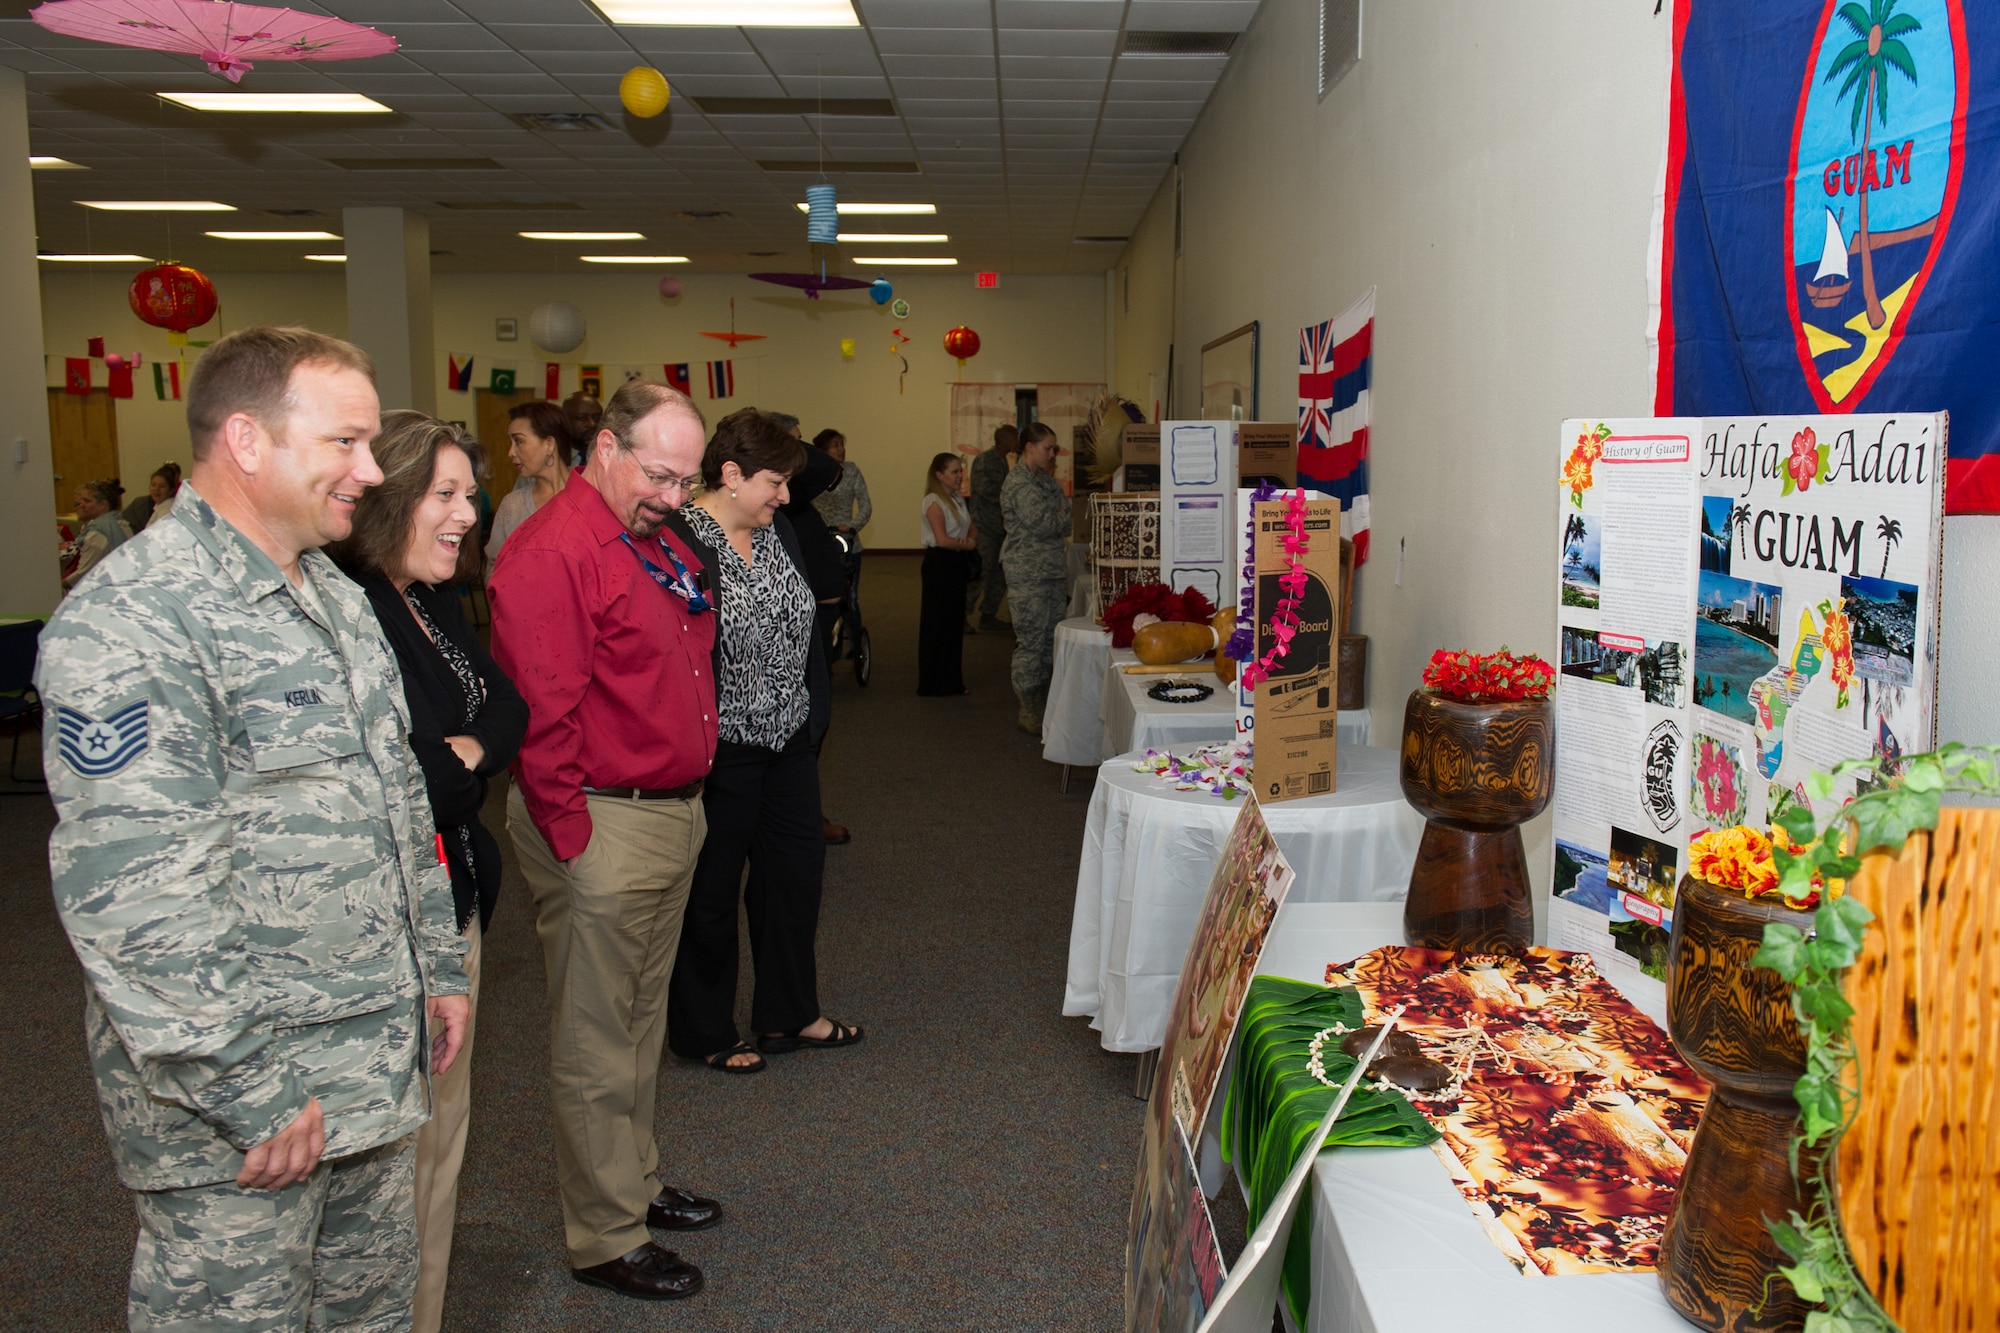 The 45th Space Wing hosted an Asian American and Pacific Islander event at the Patrick Air Force Base, Fla., Shark Center, to kick off the heritage observance month with the Taste of Asia event May 4, 2016. The theme for this year's observance is: Walk together, embrace differences, build legacies, which is designed to bring cultural awareness through art, education, food, entertainment and more. (U.S. Air Force photos/Benjamin Thacker) (Released)